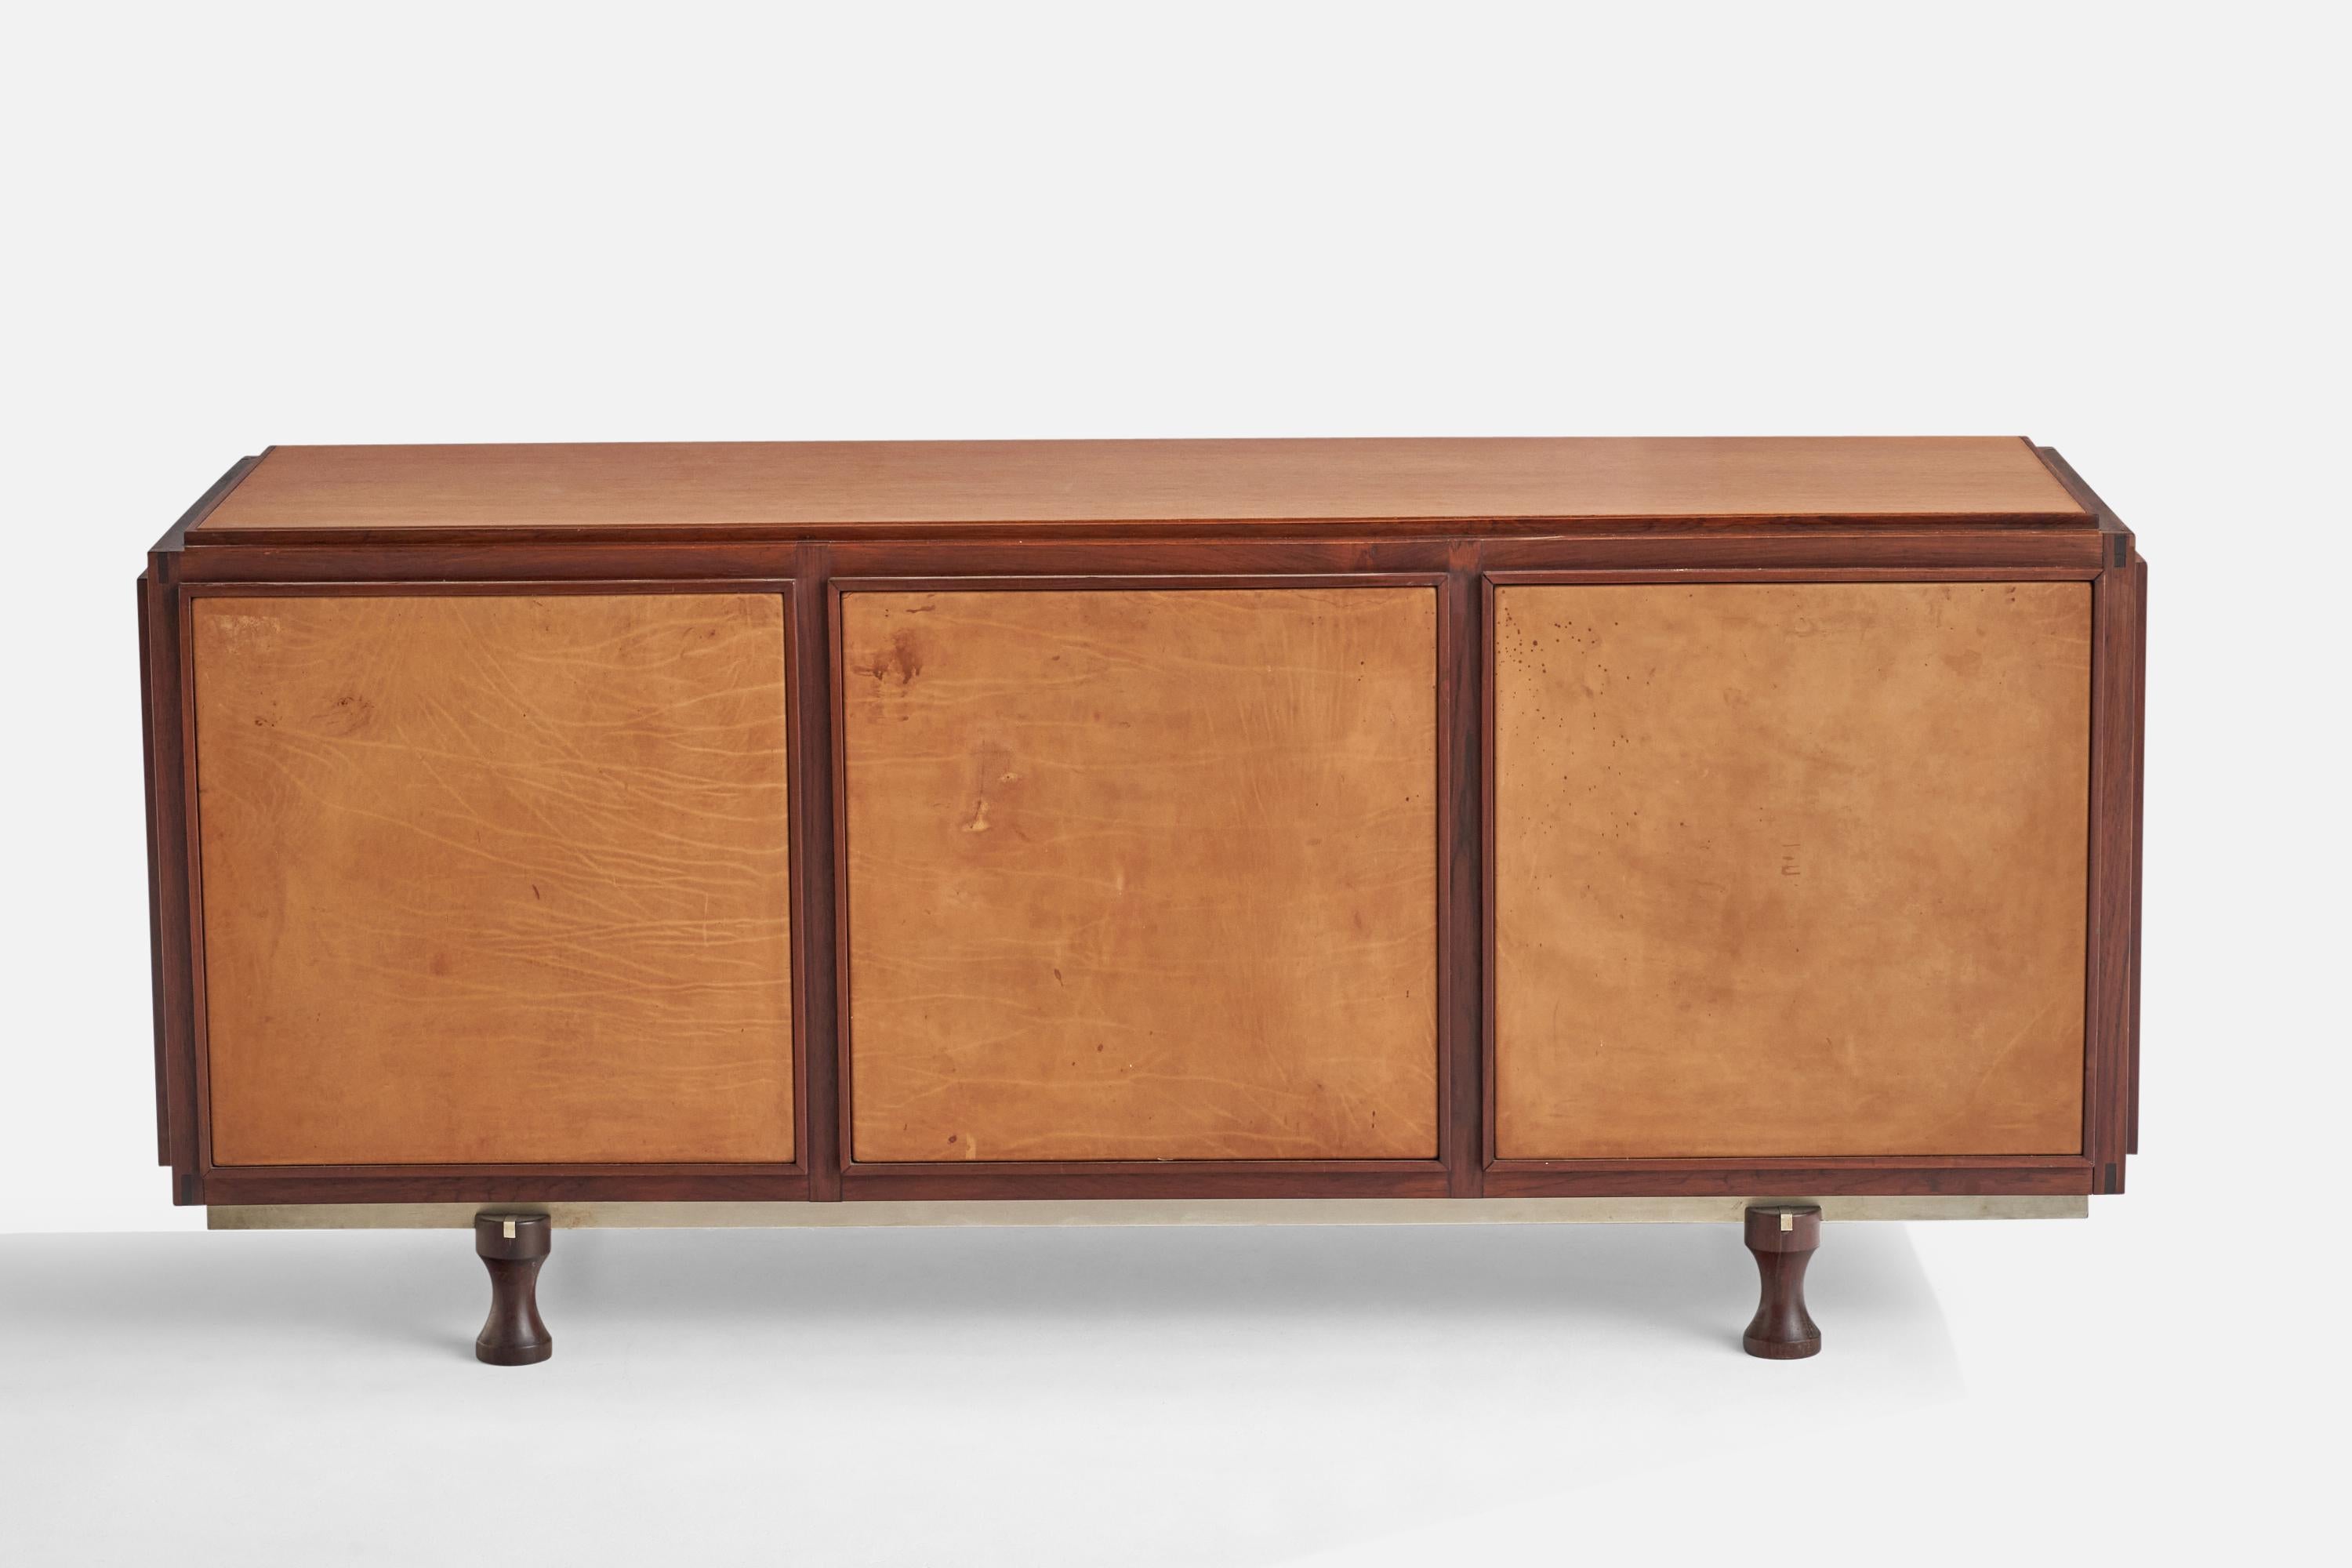 Gianfranco Frattini, Unique Sideboard, Rosewood, Leather, Steel, Italy, 1950s In Good Condition For Sale In High Point, NC